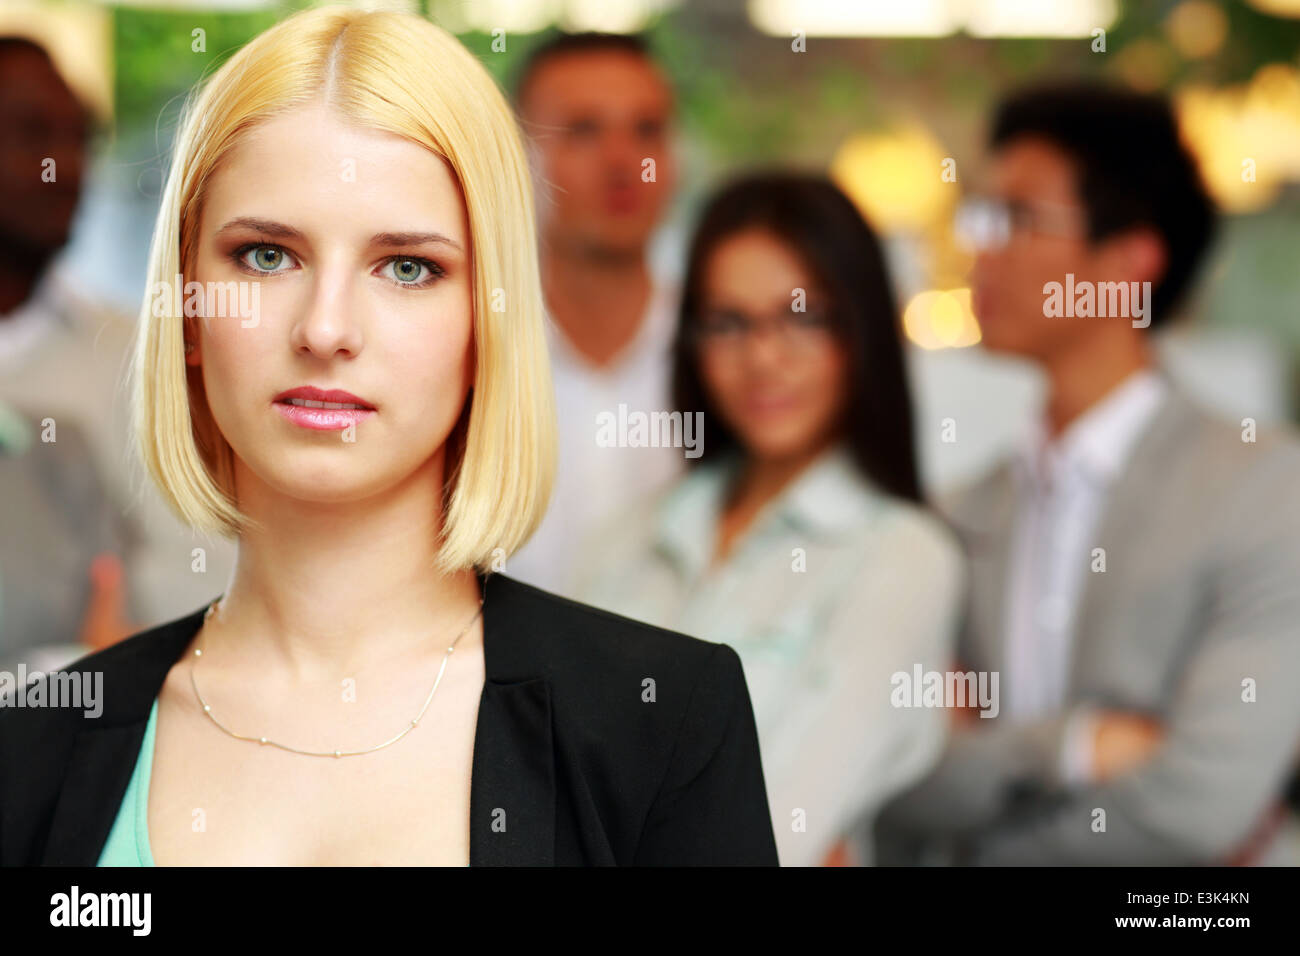 Portrait of a thoughtful businesswoman standing in front of colleagues Stock Photo